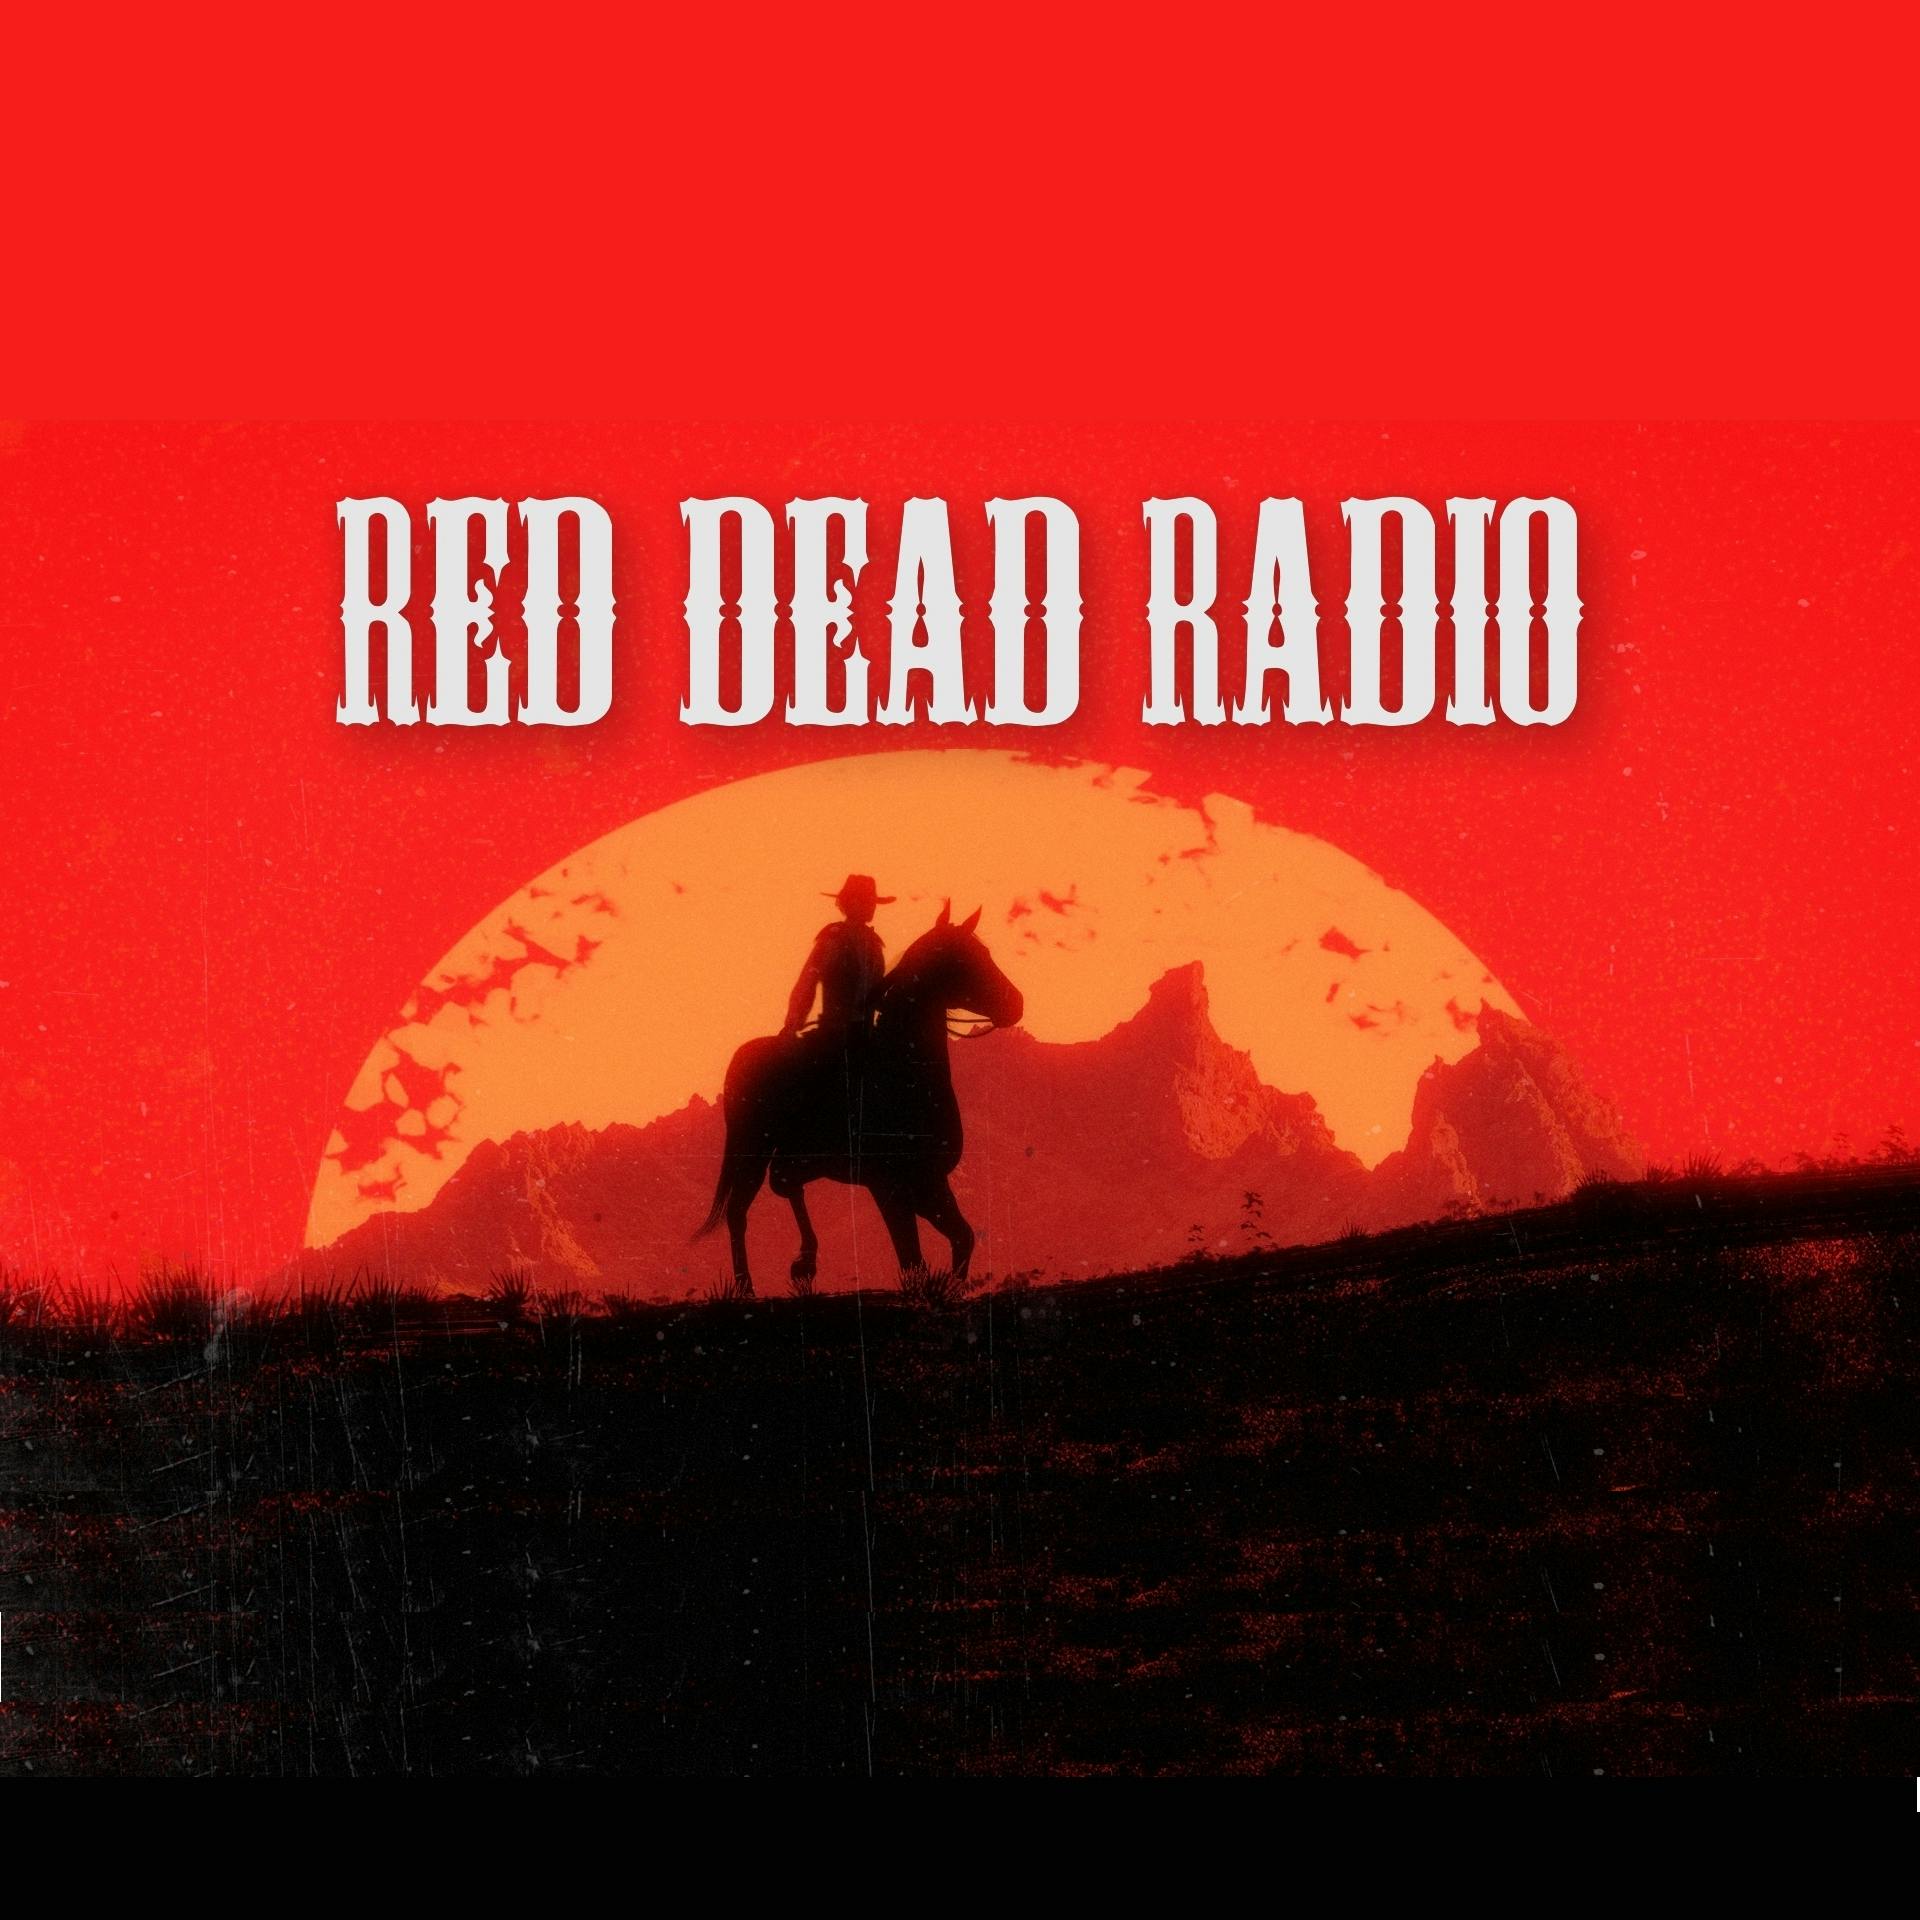 Casey Didn't Know How Red Dead 1 Ended (Spoilers!) - Red Dead Radio Ep. 36